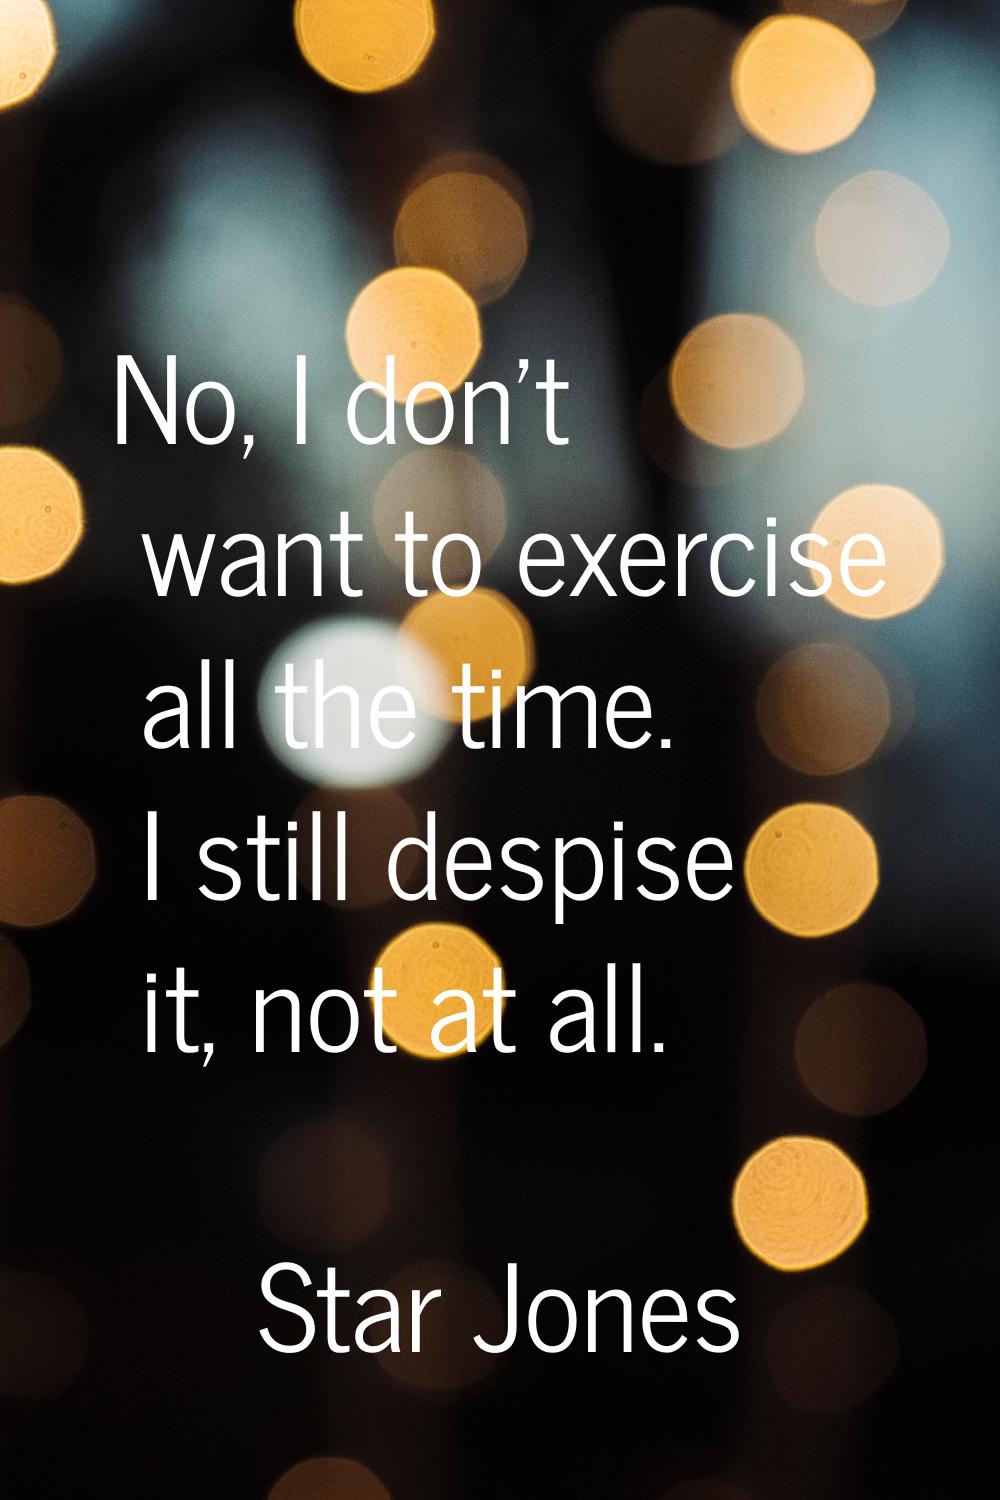 No, I don't want to exercise all the time. I still despise it, not at all.